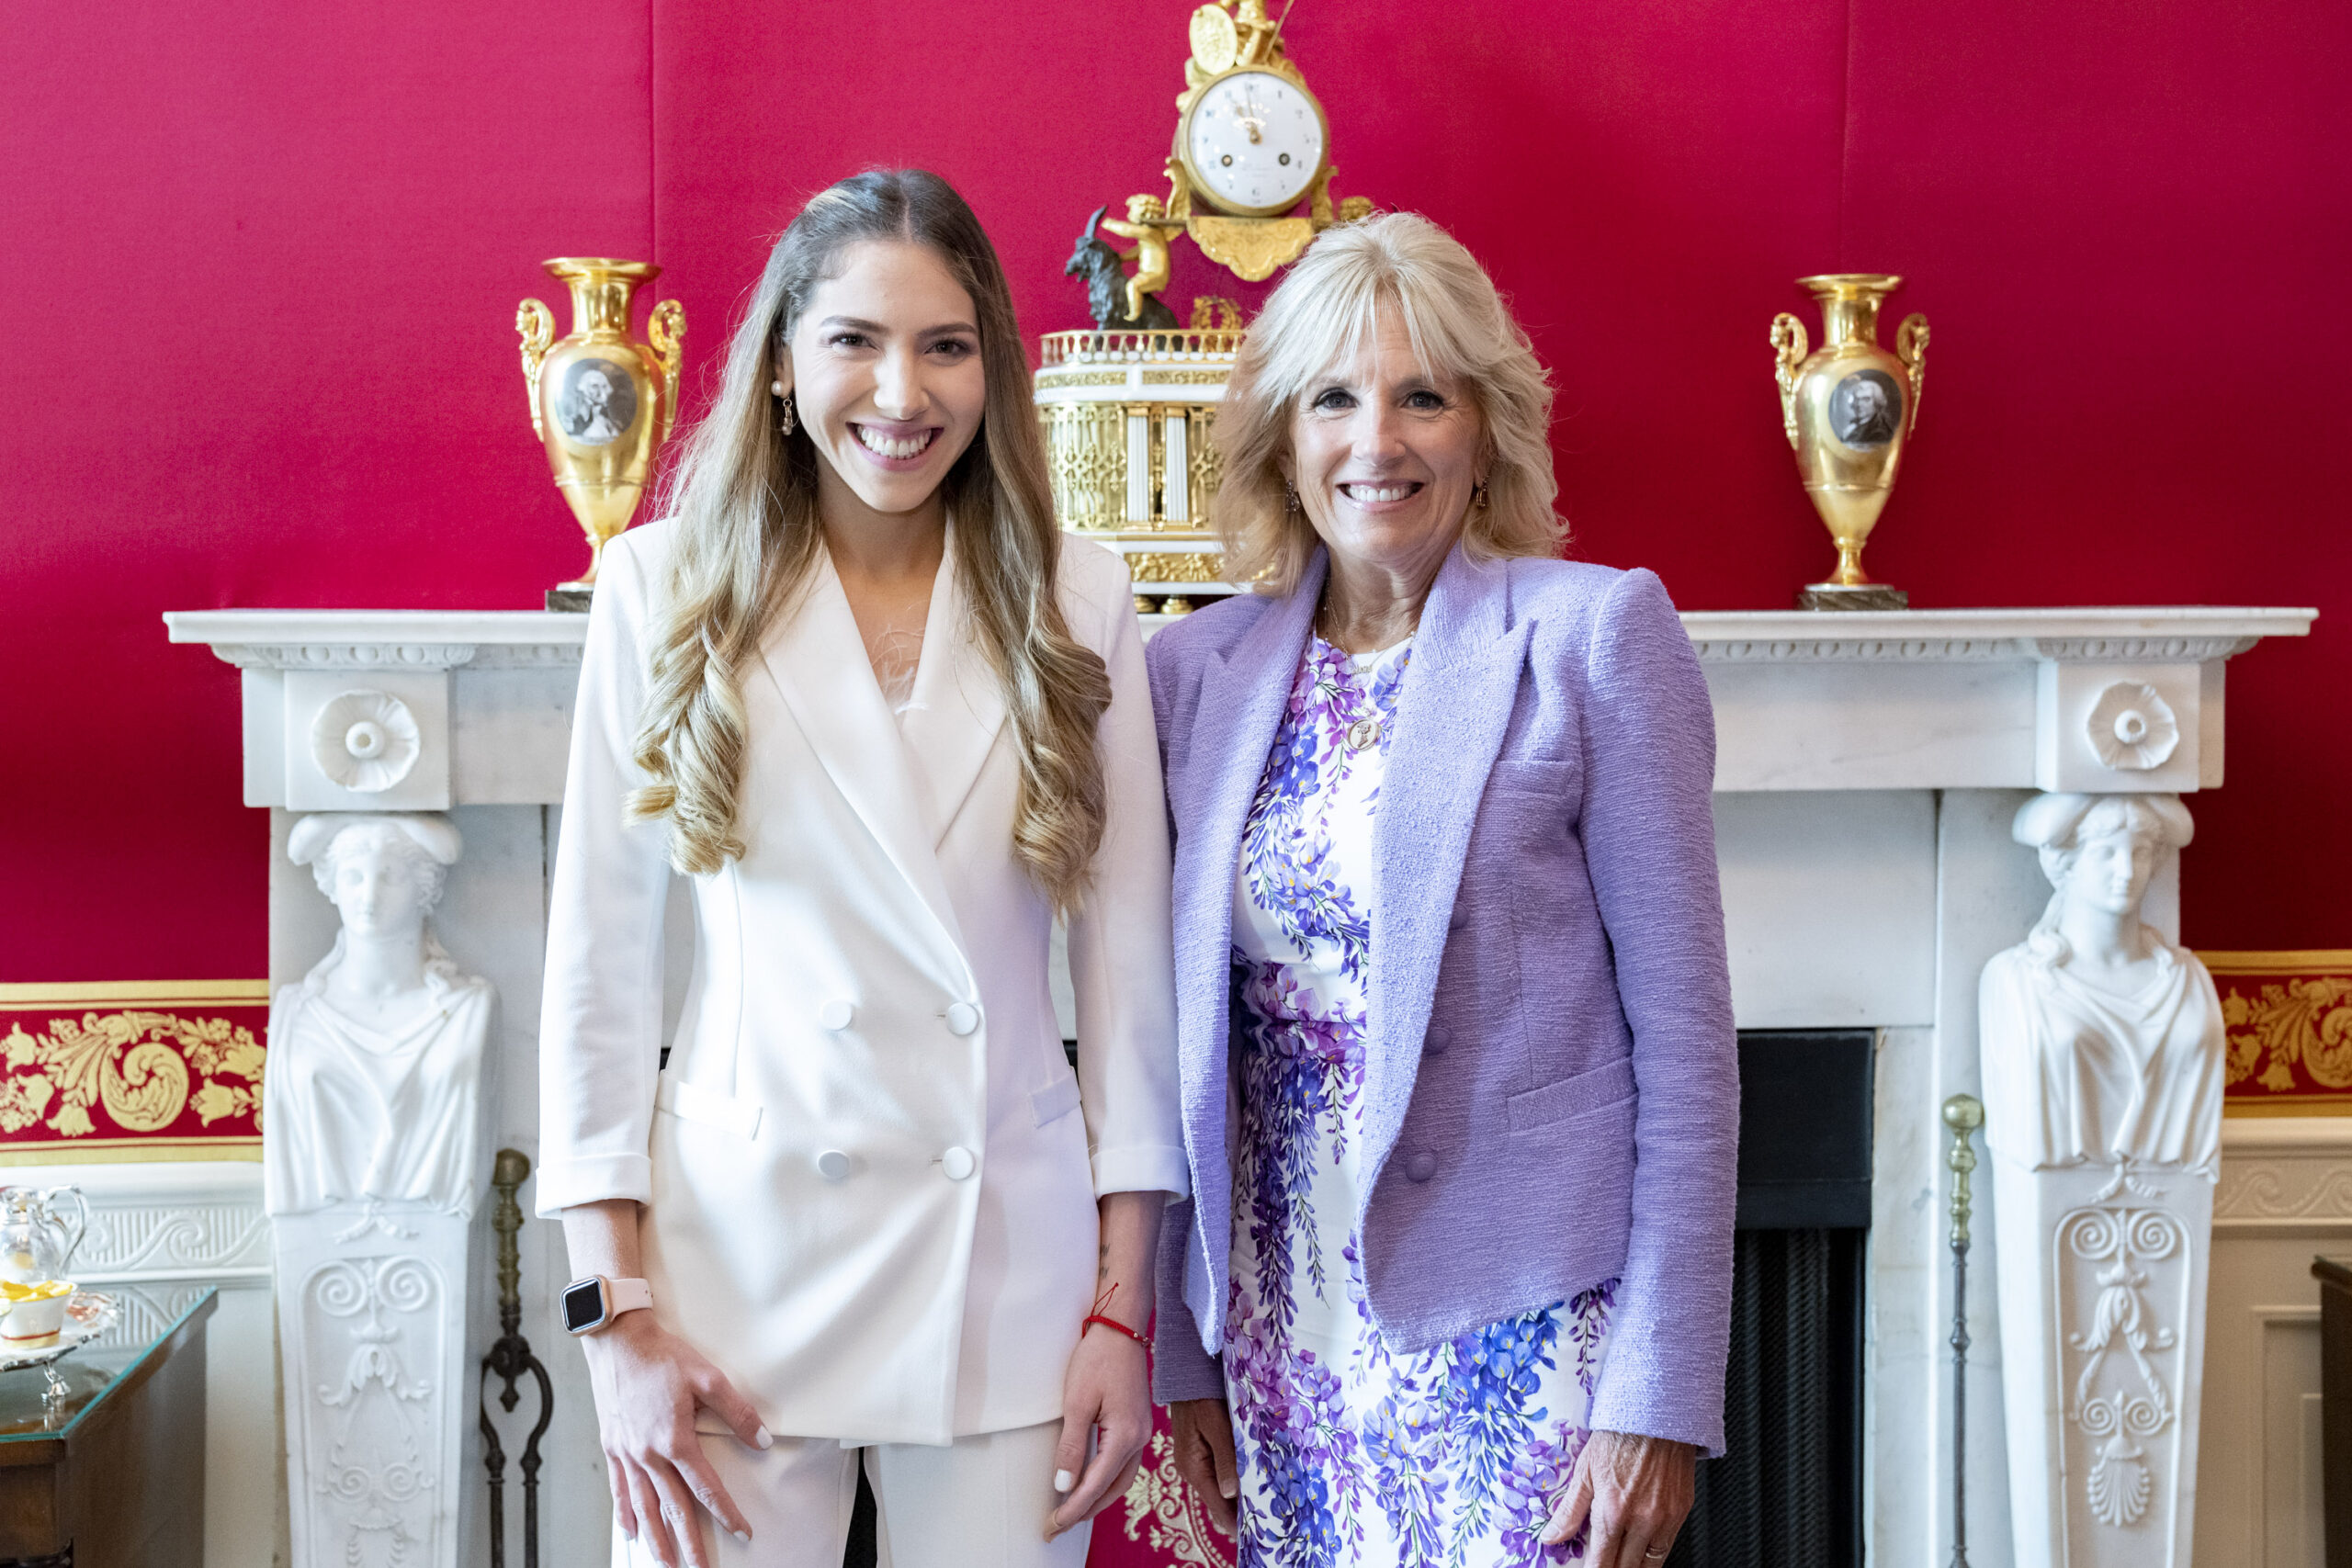 Jill Biden received Fabiana Rosales at the White House: "She is a brave first lady who fights for Venezuelans"